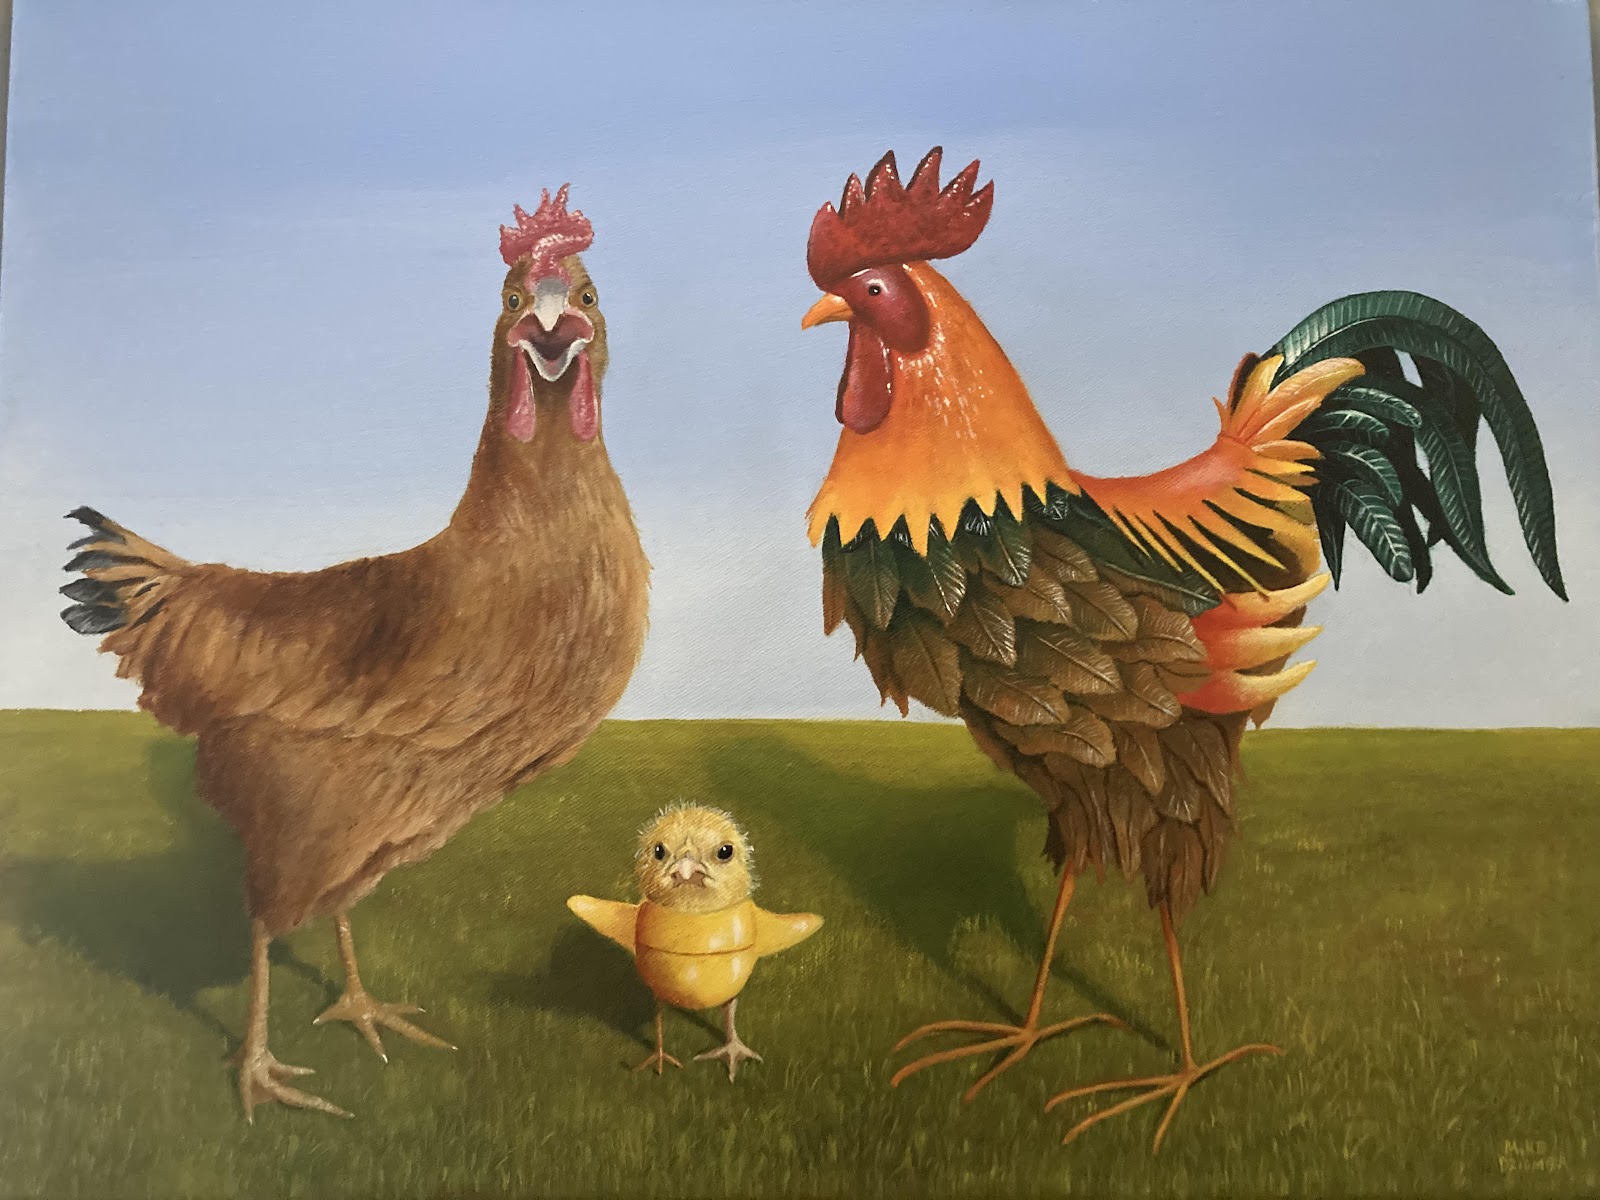 A chicken, baby chick, and a rooster standing in the grass with a blue sky background